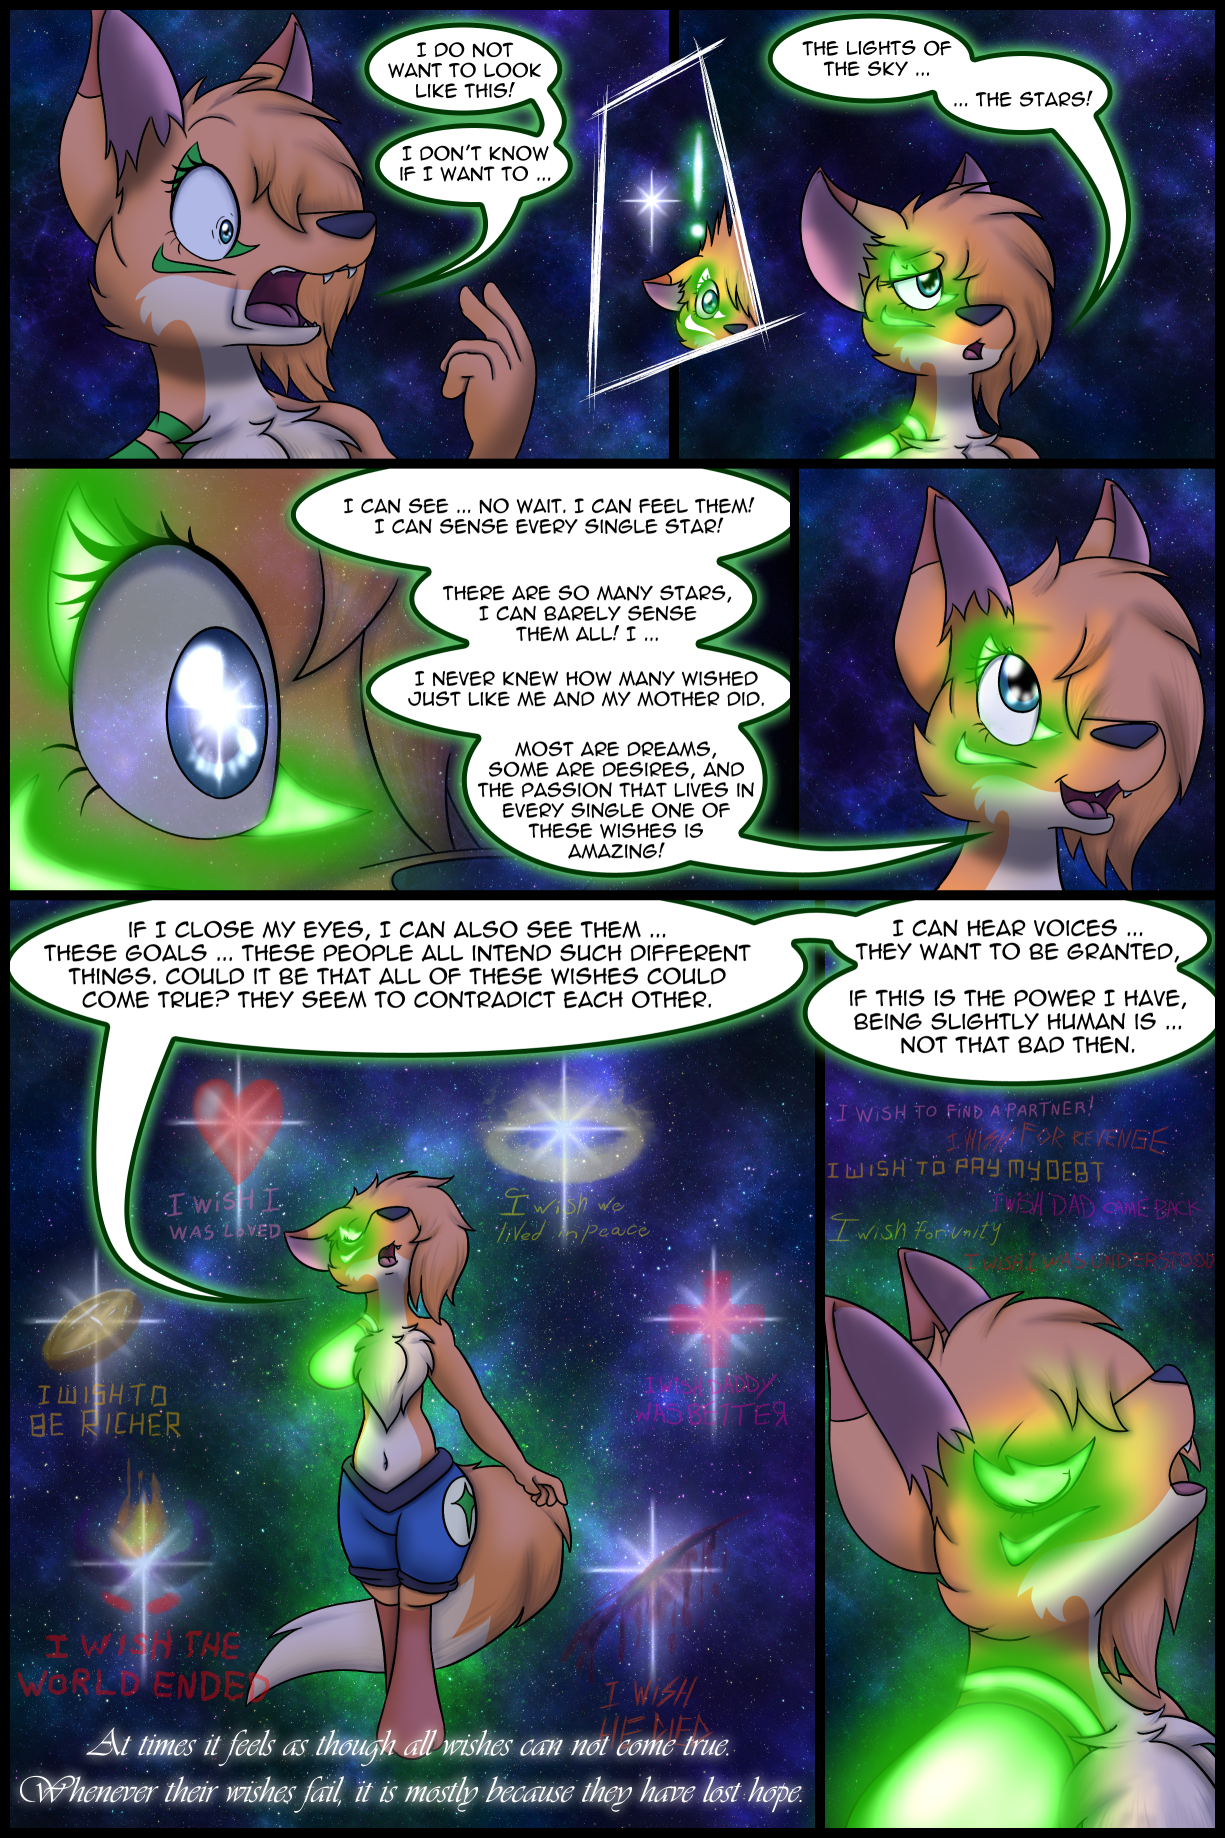 Ch1 Remastered Page 24-25 – That Feeling … – The many wishes